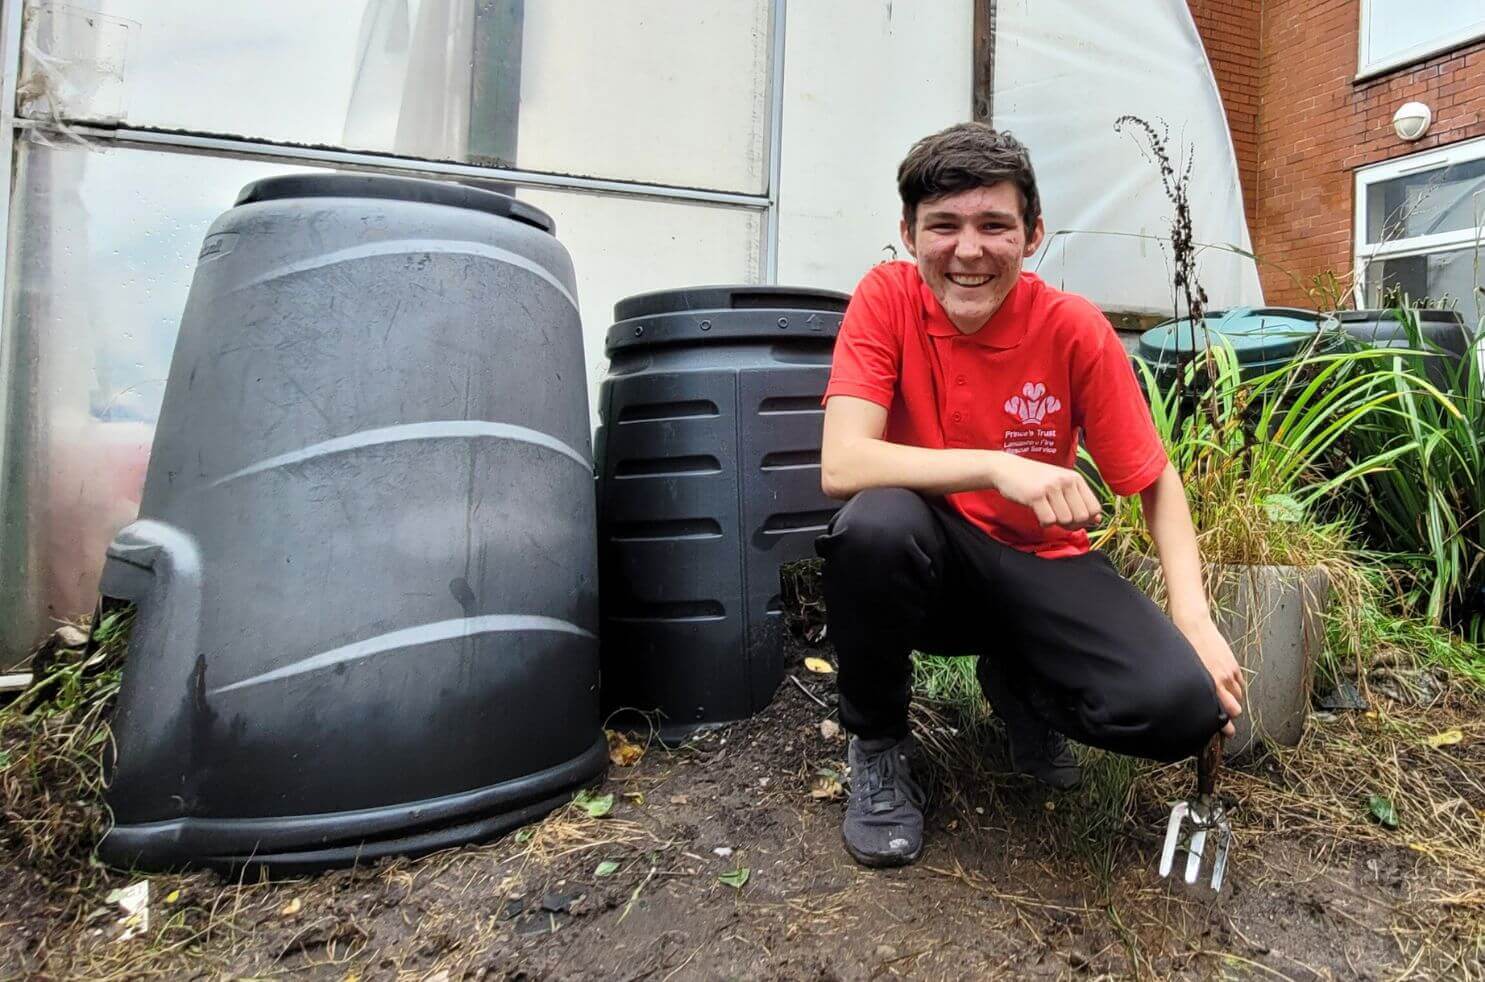 Bobby from the Prince's Trust helped clear our community gardens ready for planting